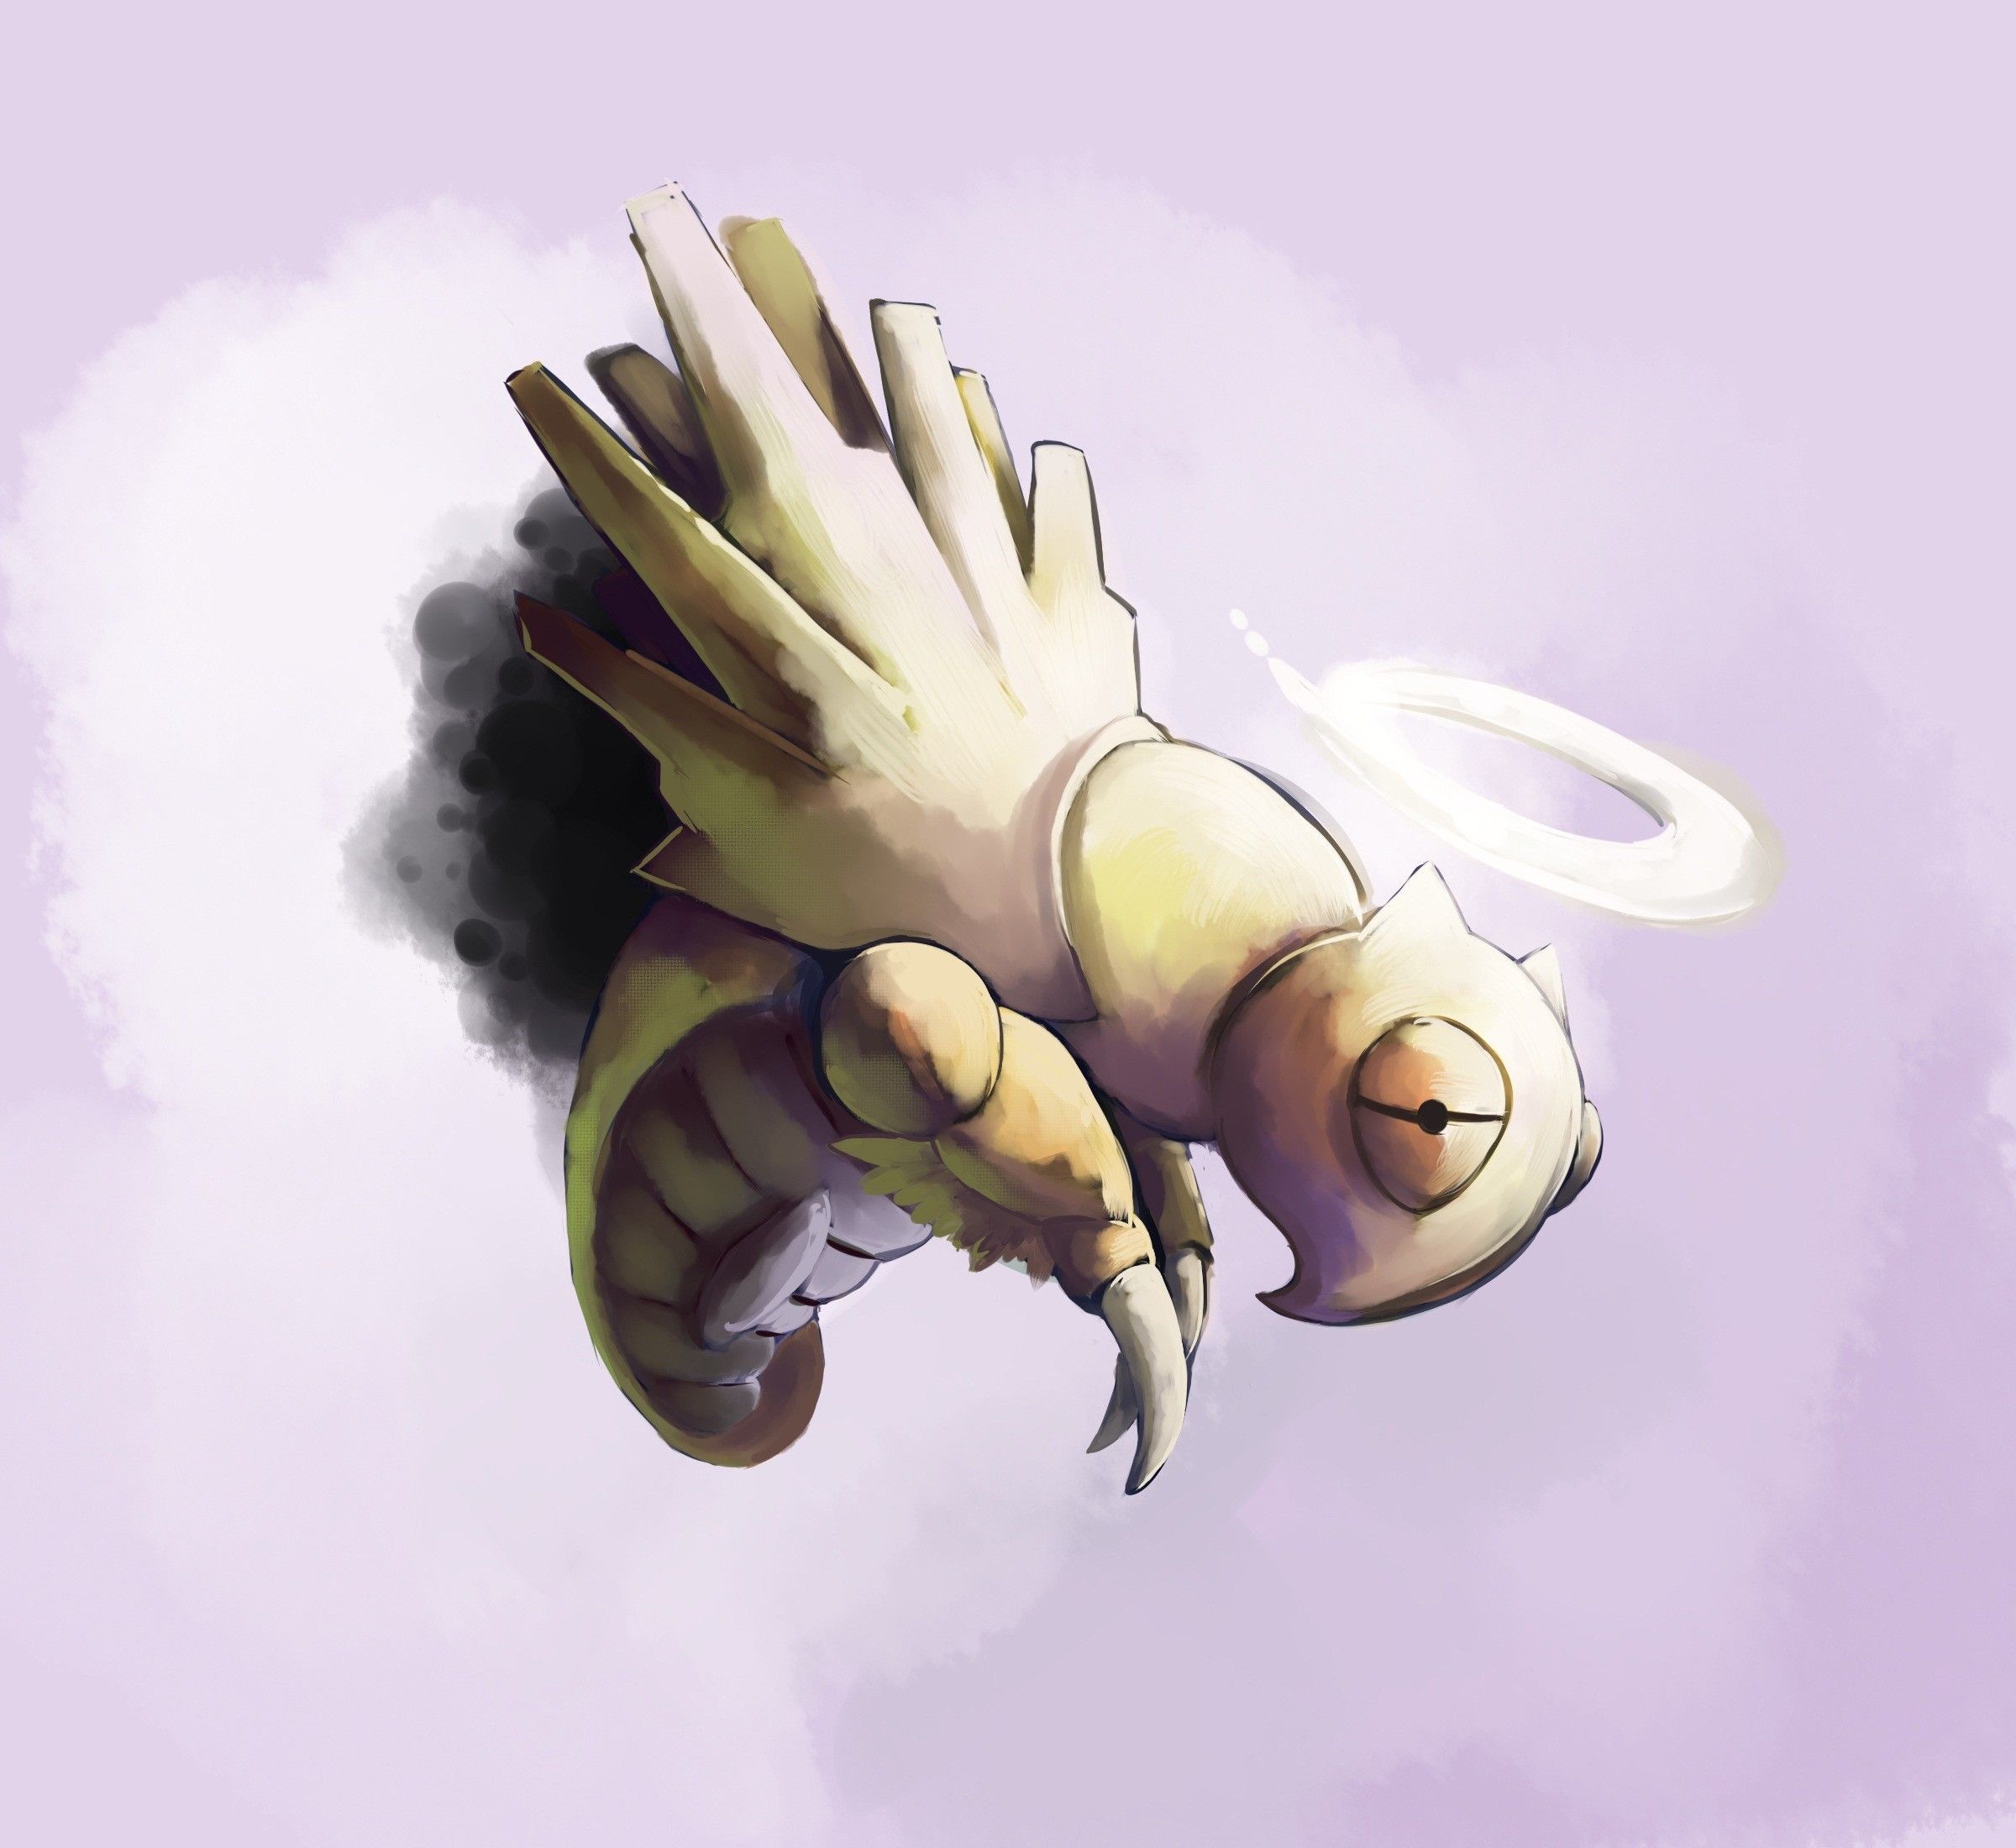 creepy pokemon insects dead simple background grey background shedinja 2400x2200 wallpaper High Quality Wallpaper, High Definition Wallpaper